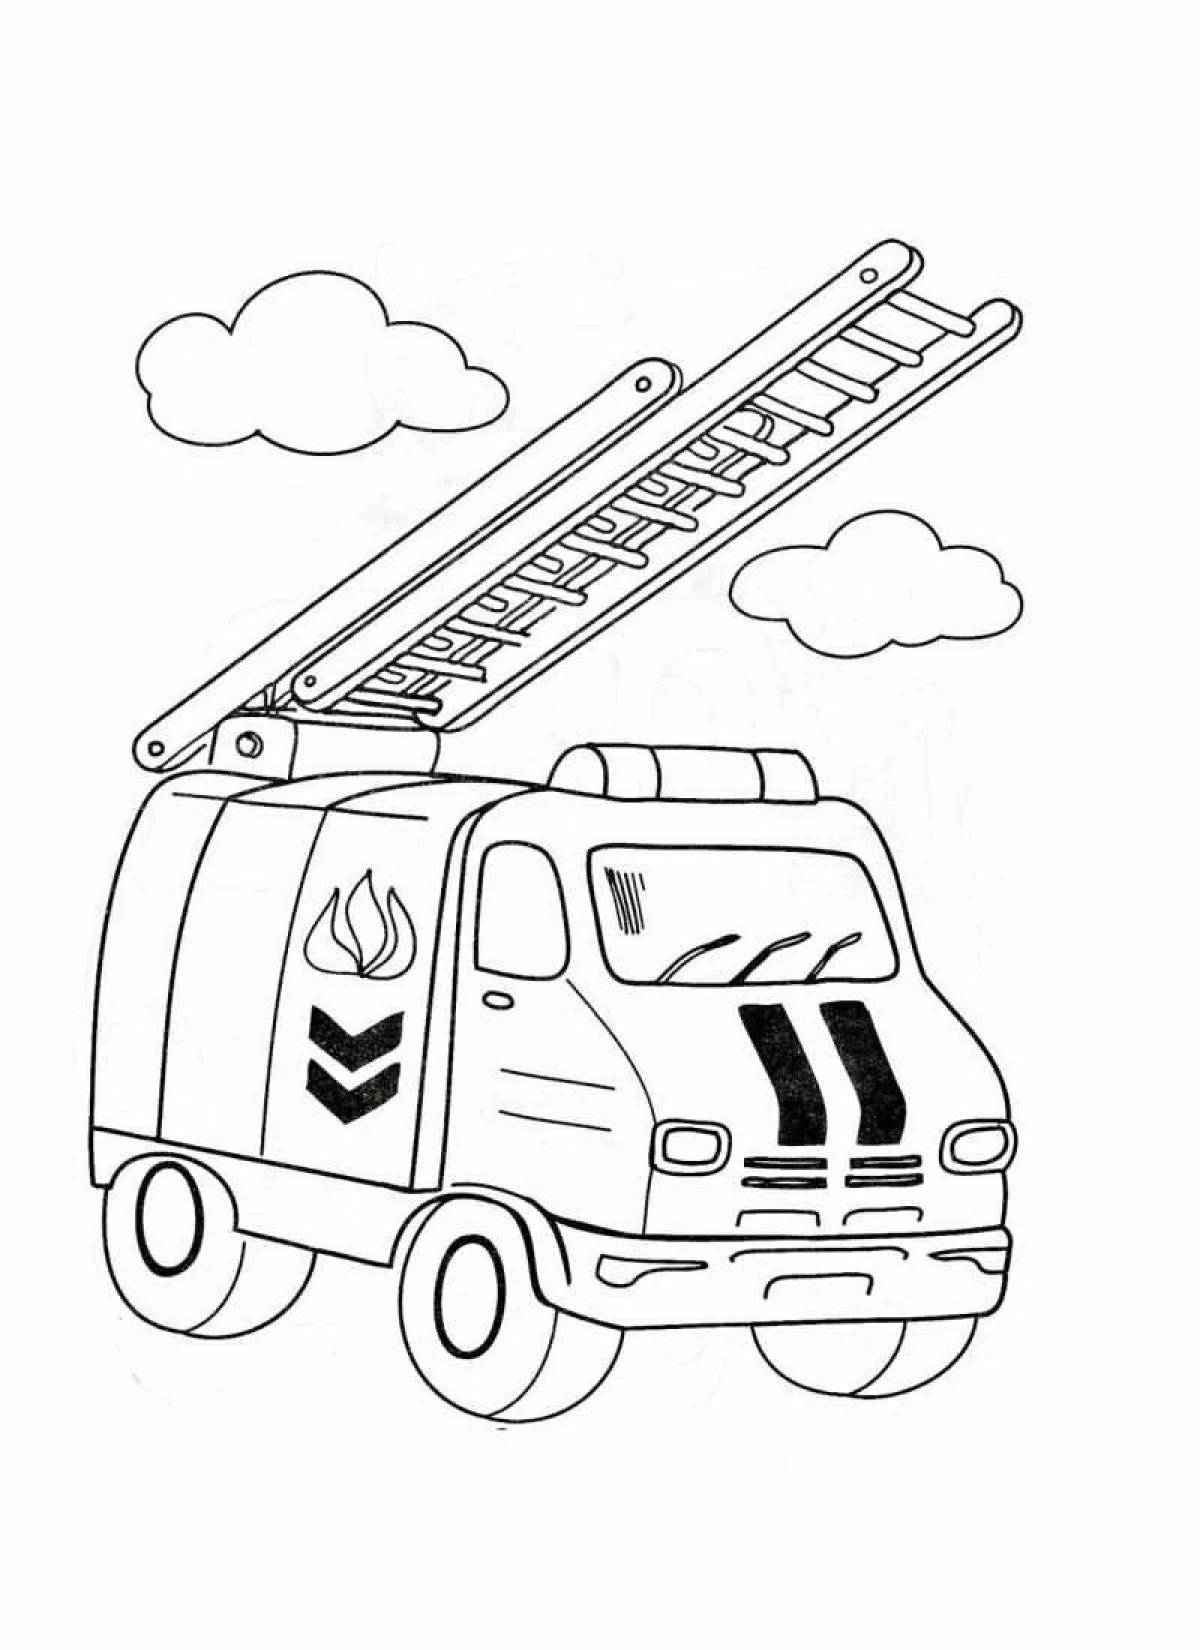 Coloring page inviting fire equipment